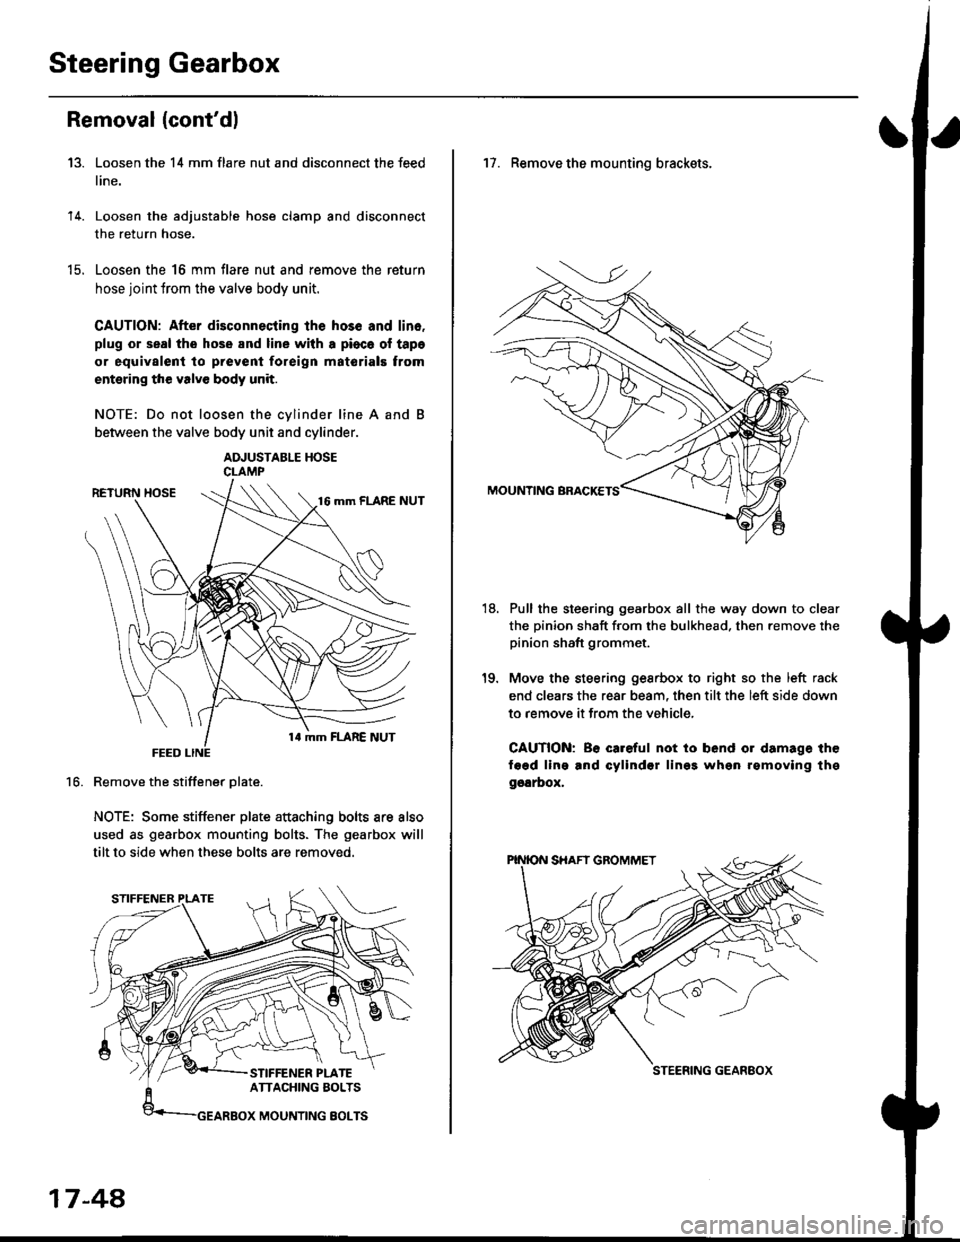 HONDA CIVIC 1996 6.G Repair Manual Steering Gearbox
Removal {contdl
Loosen the 14 mm flare nut and disconnect the feed
line.
Loosen the adjustable hose clamp and disconnect
the return hose.
Loosen the 16 mm flare nut and remove the re